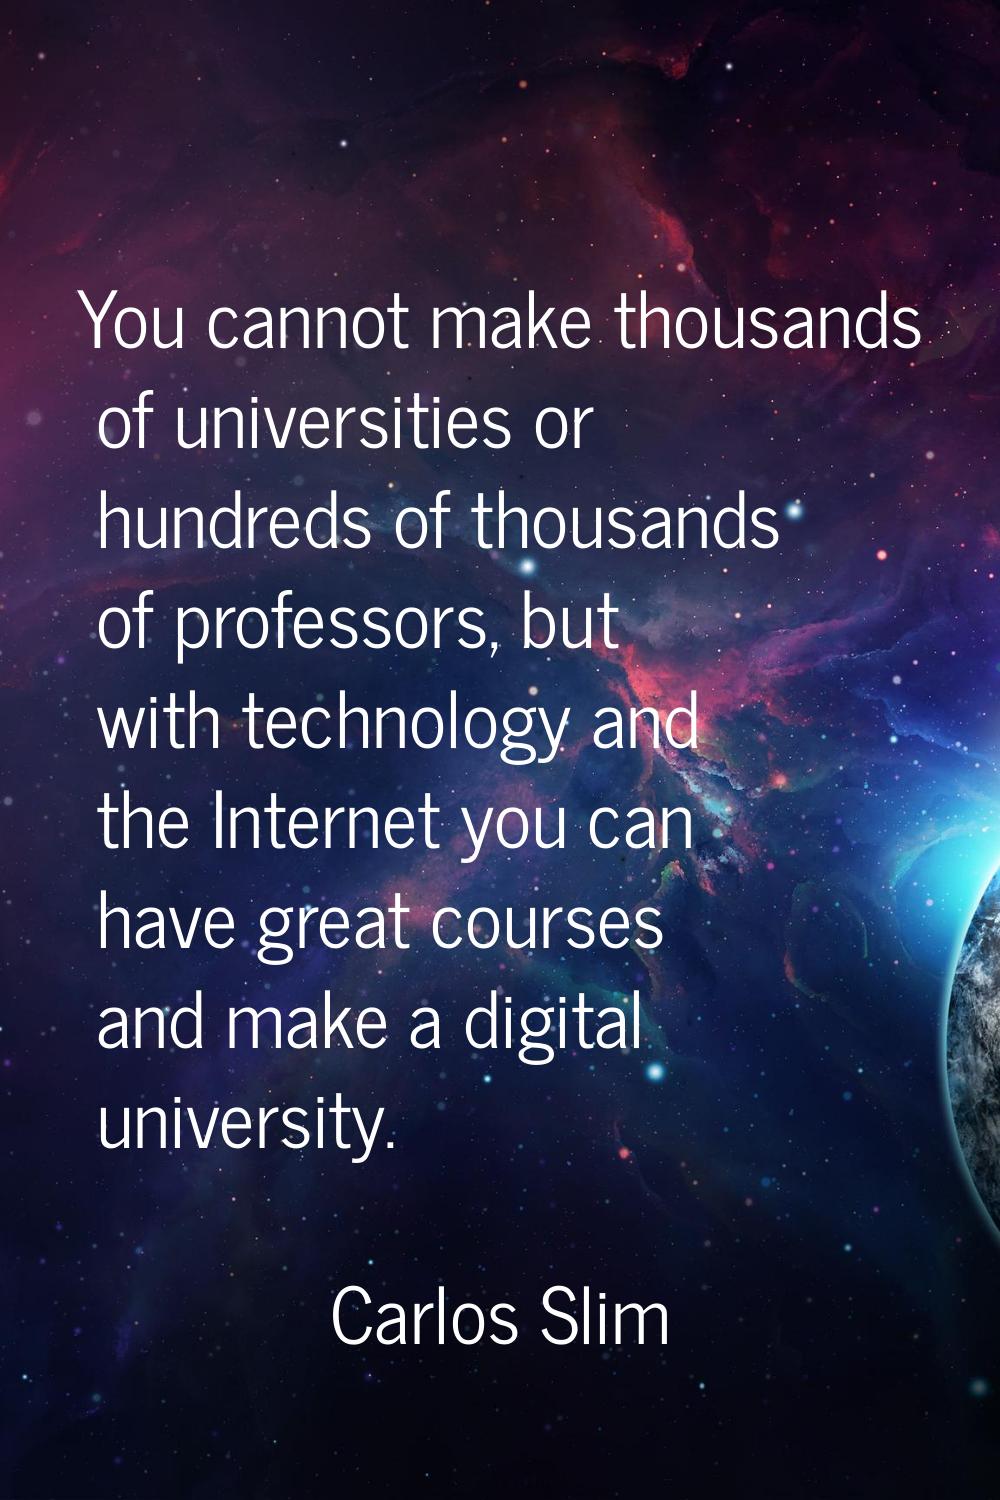 You cannot make thousands of universities or hundreds of thousands of professors, but with technolo